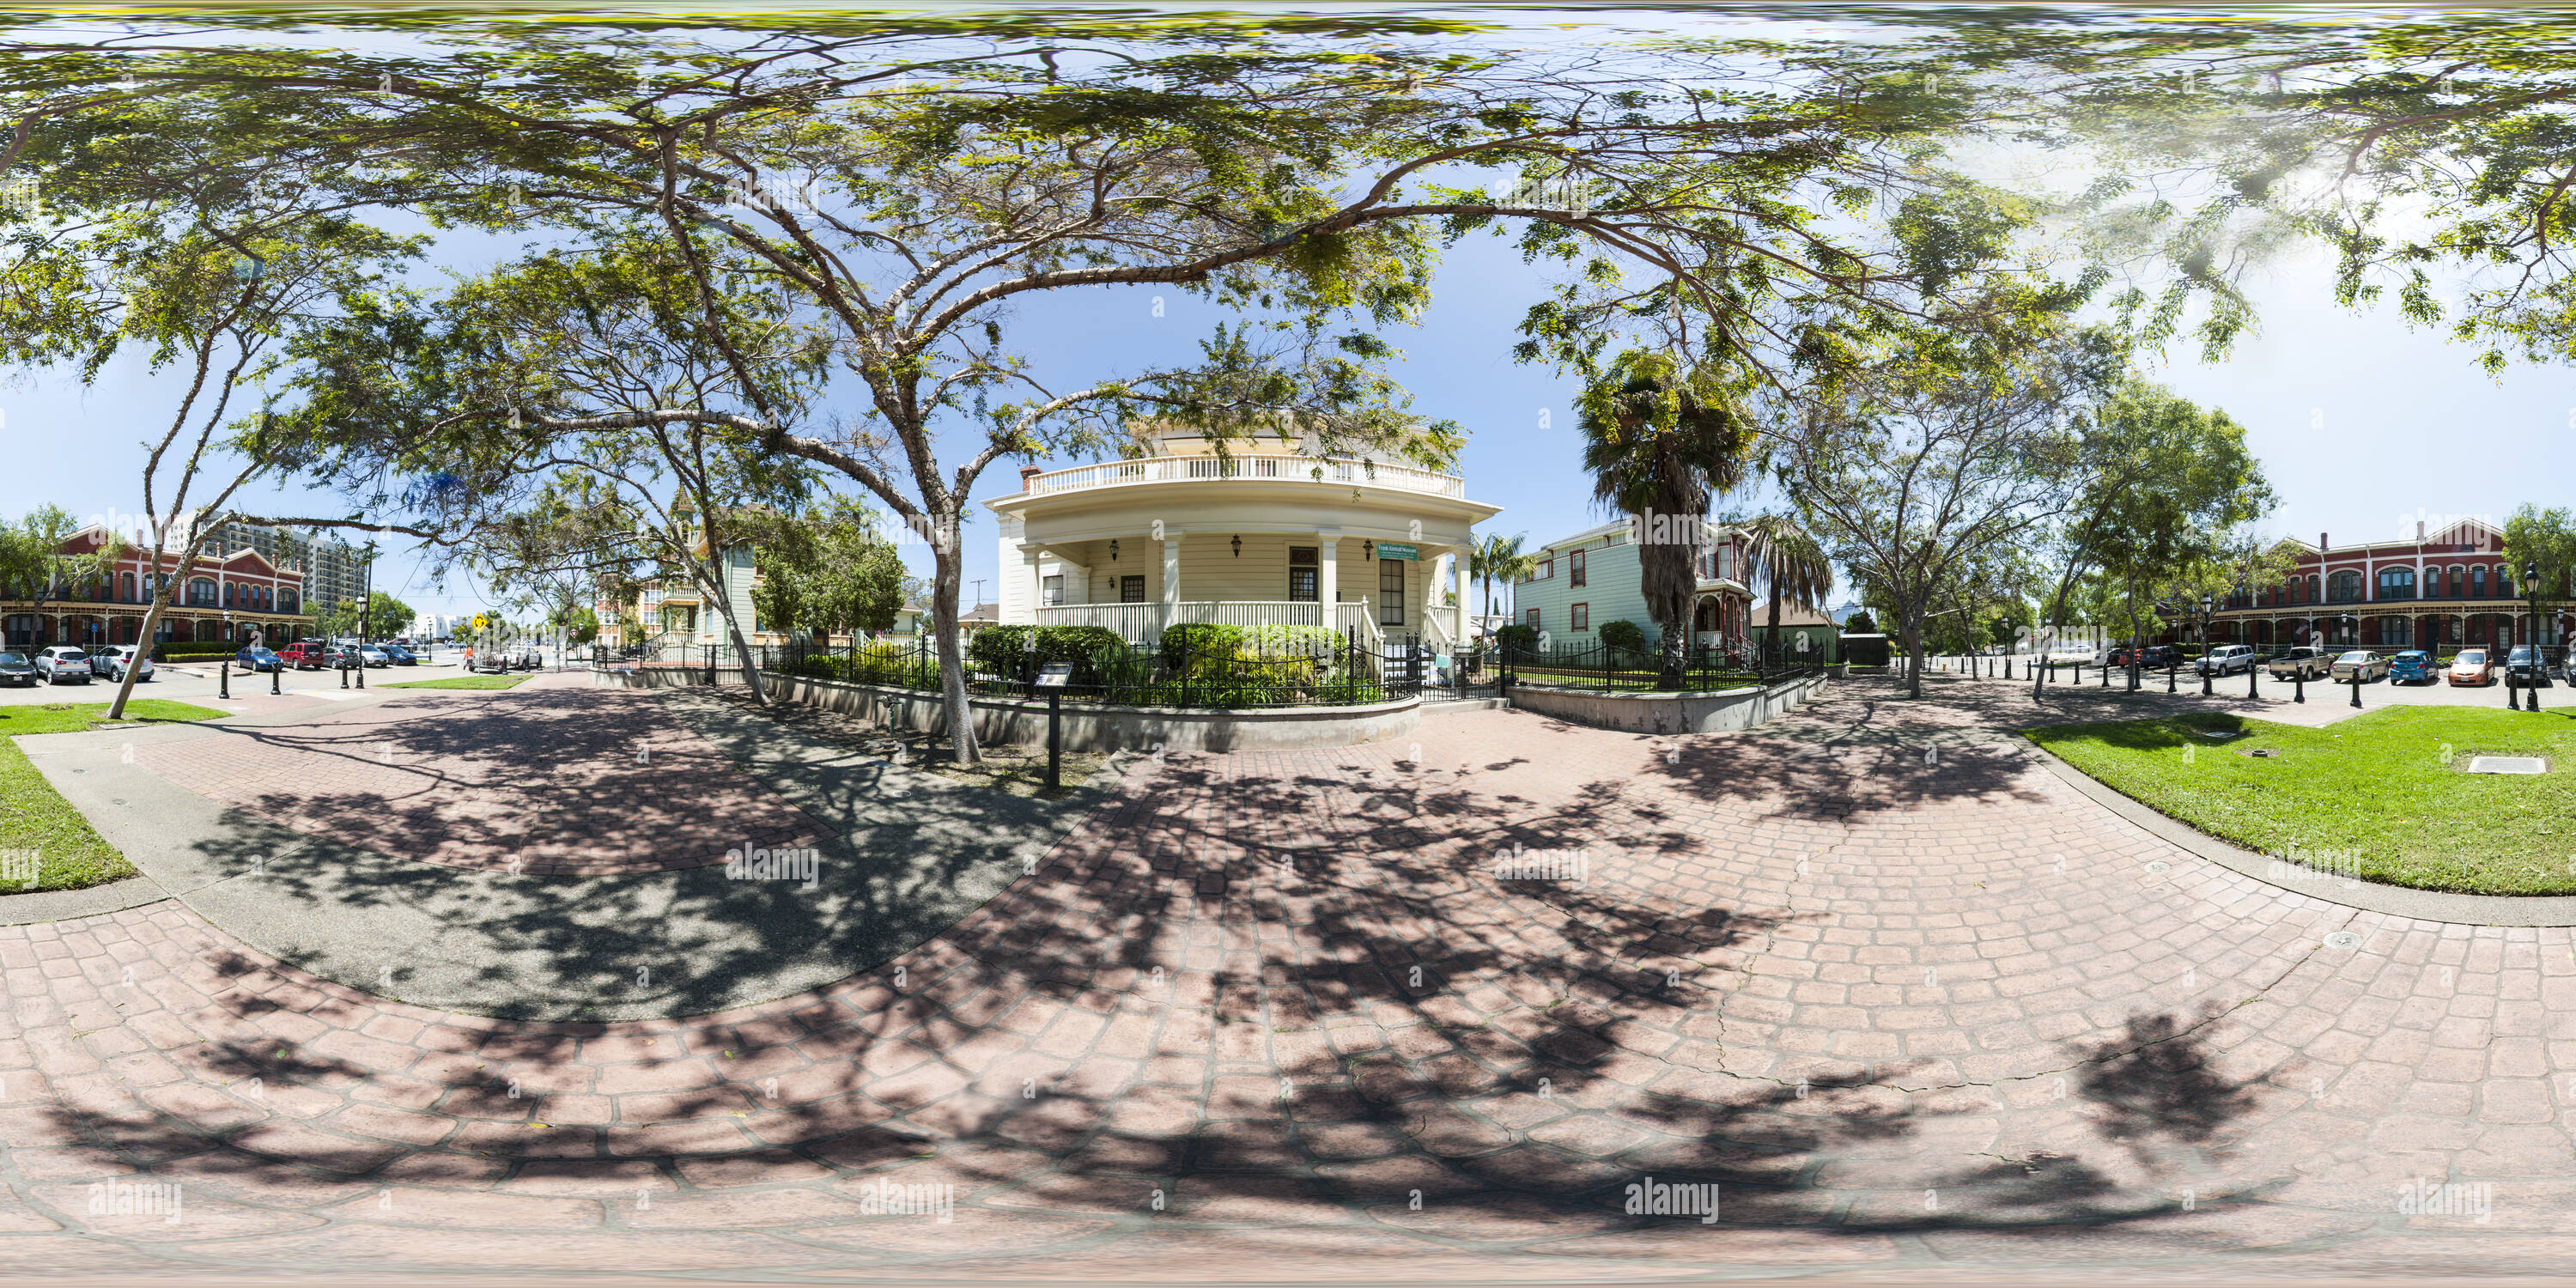 360 degree panoramic view of The Frank Kimball House in National City, California